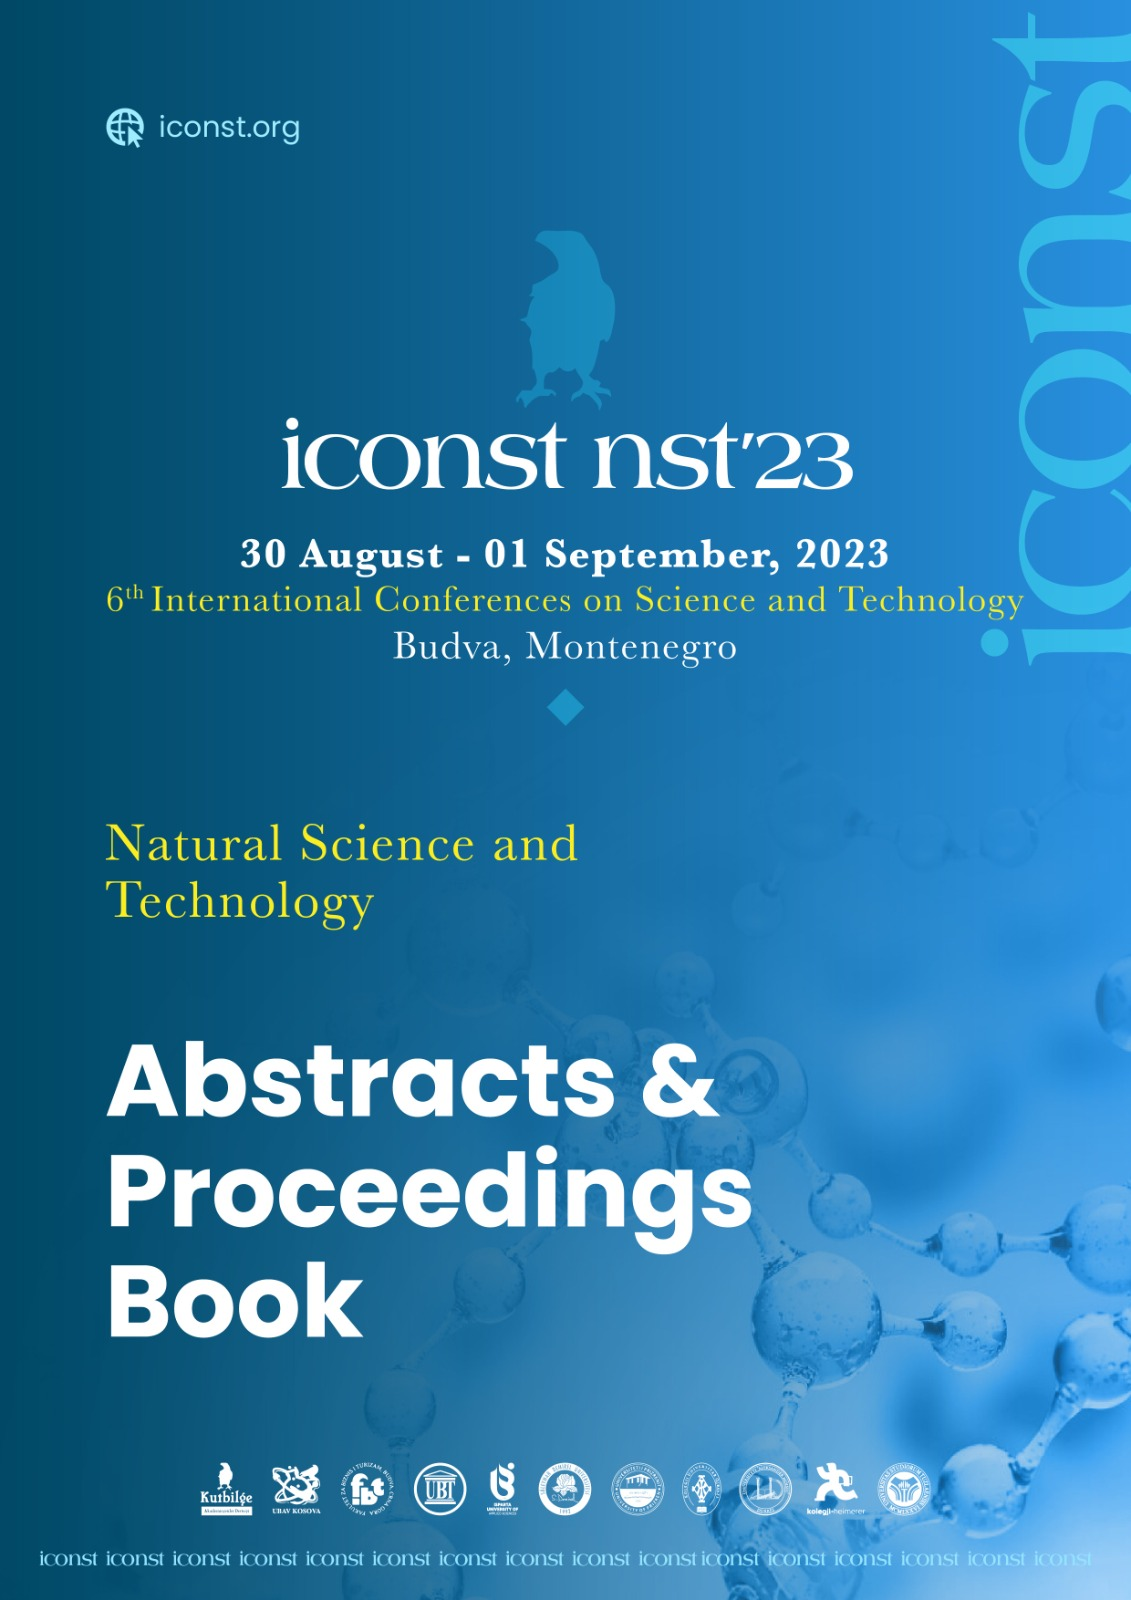 Abstracts & Proceedings Book